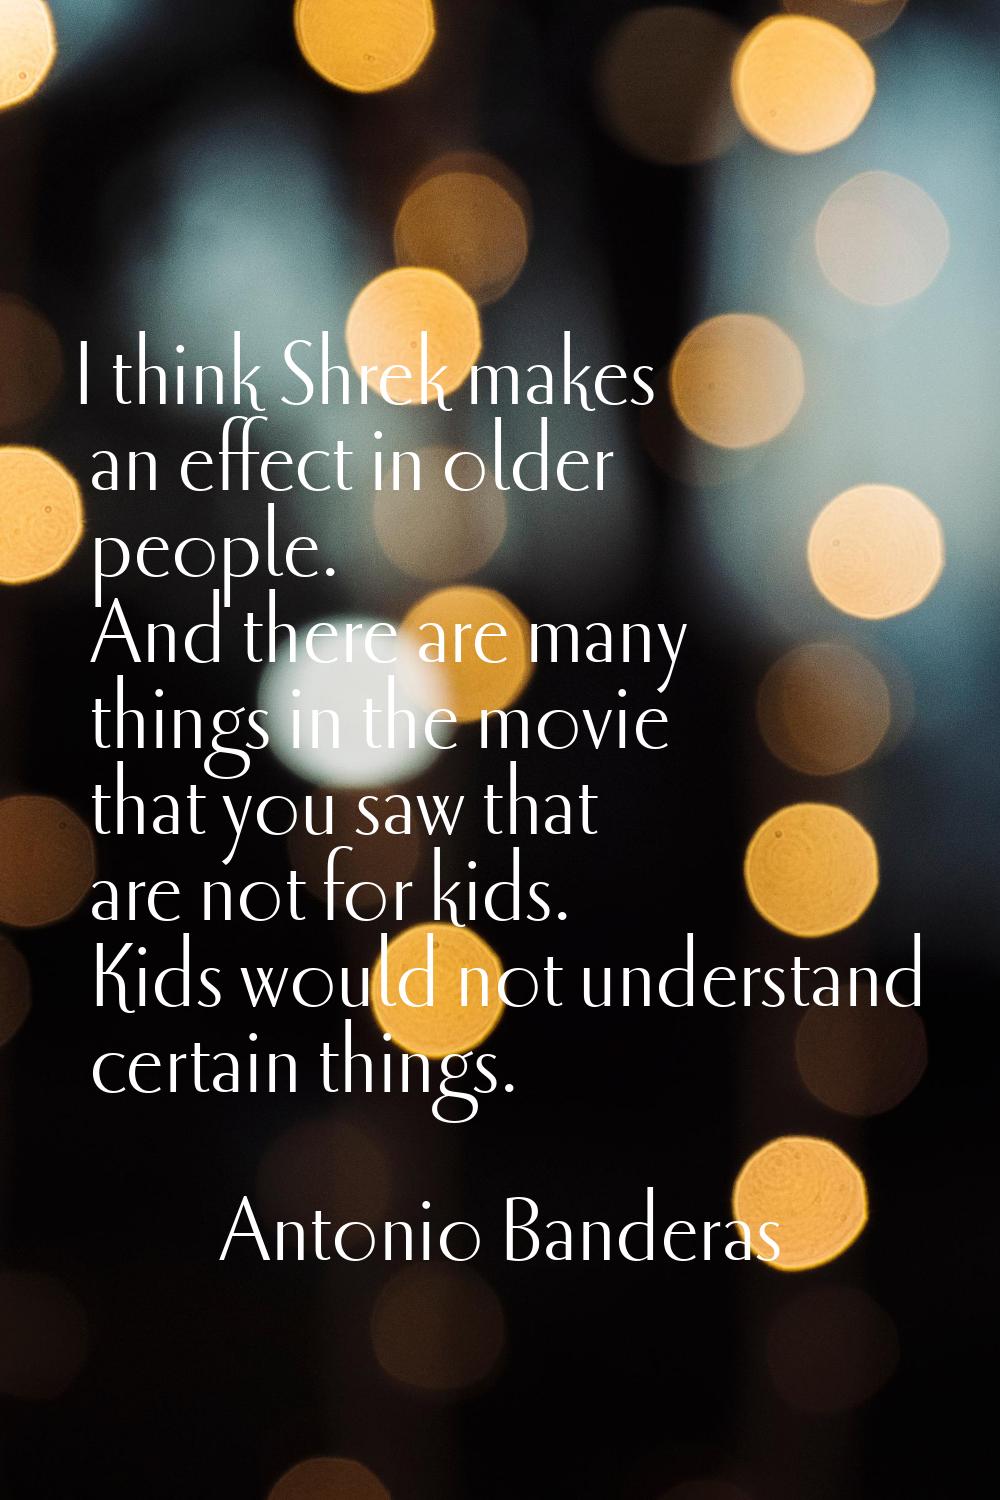 I think Shrek makes an effect in older people. And there are many things in the movie that you saw 